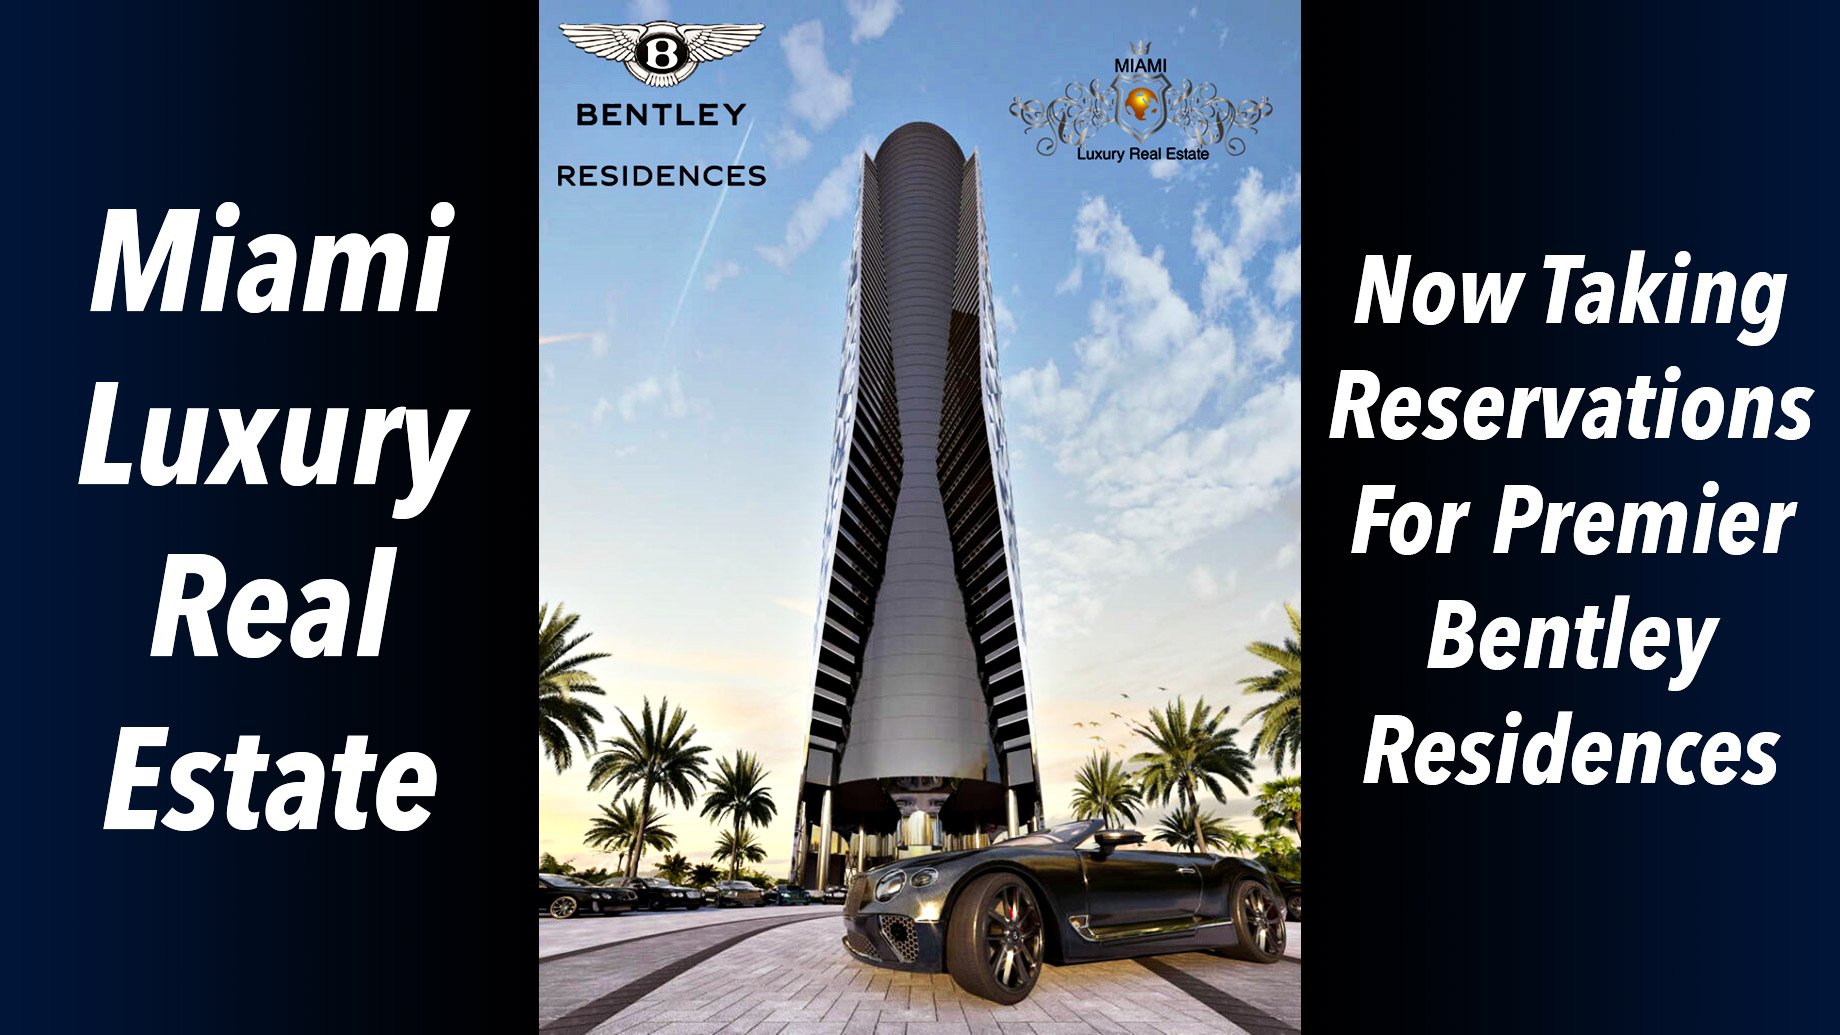 Miami Luxury Real Estate LLC Now Taking Reservations For  Premier Bentley Residences In Miami